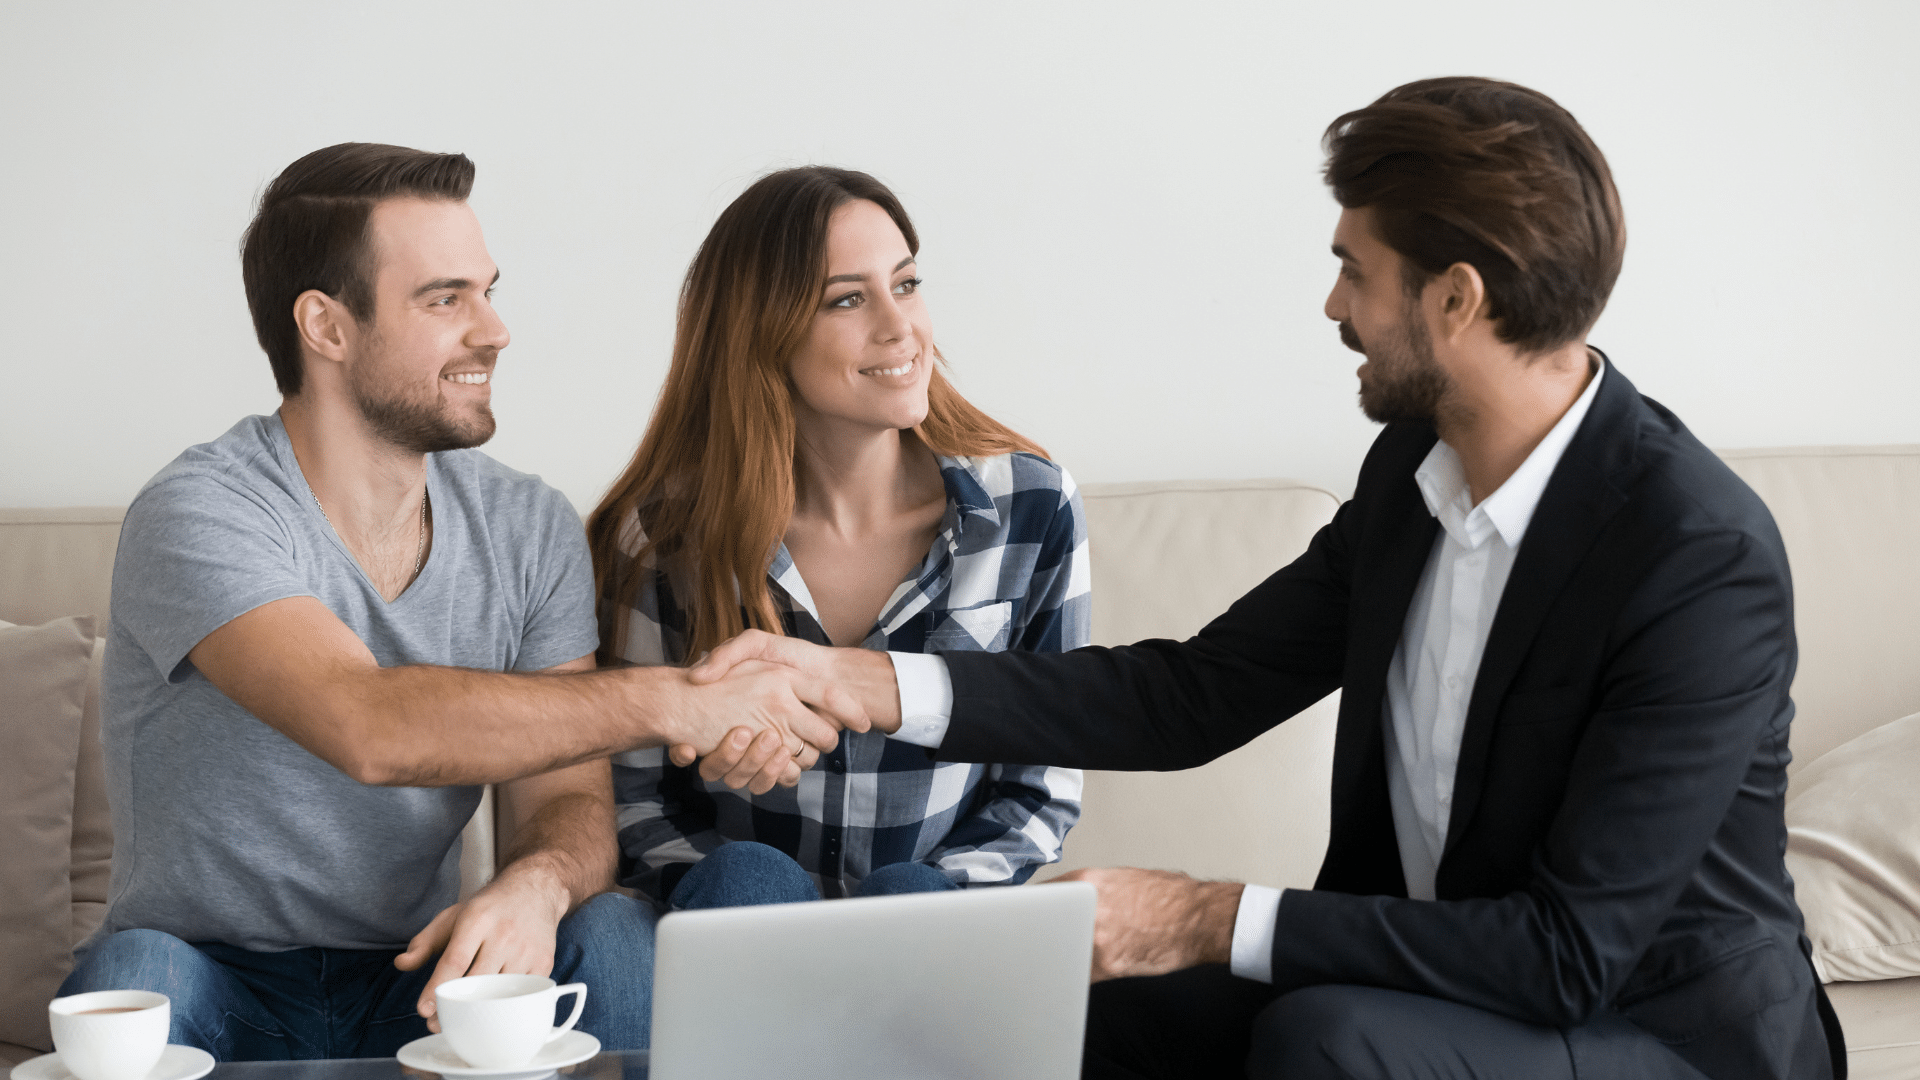 An image of a small business owner and her husband meeting with their business consultant and estate planner.